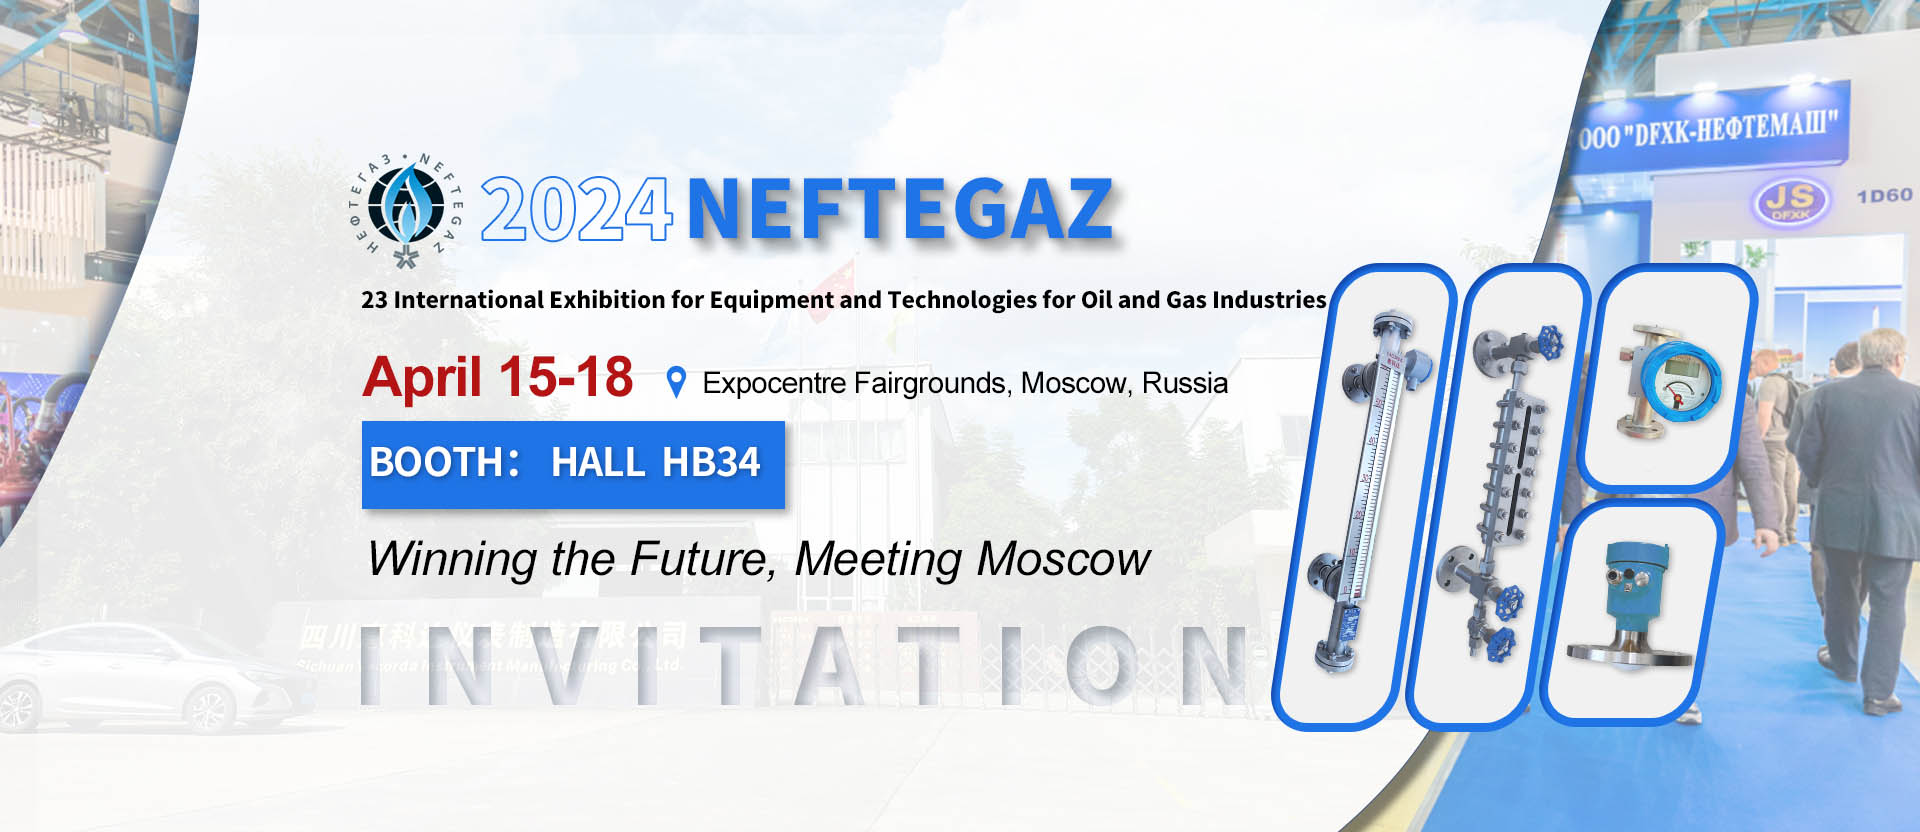 Vacorda at NEFTEGAZ 2024: Pioneering Excellence in Moscow's Energy Exhibition